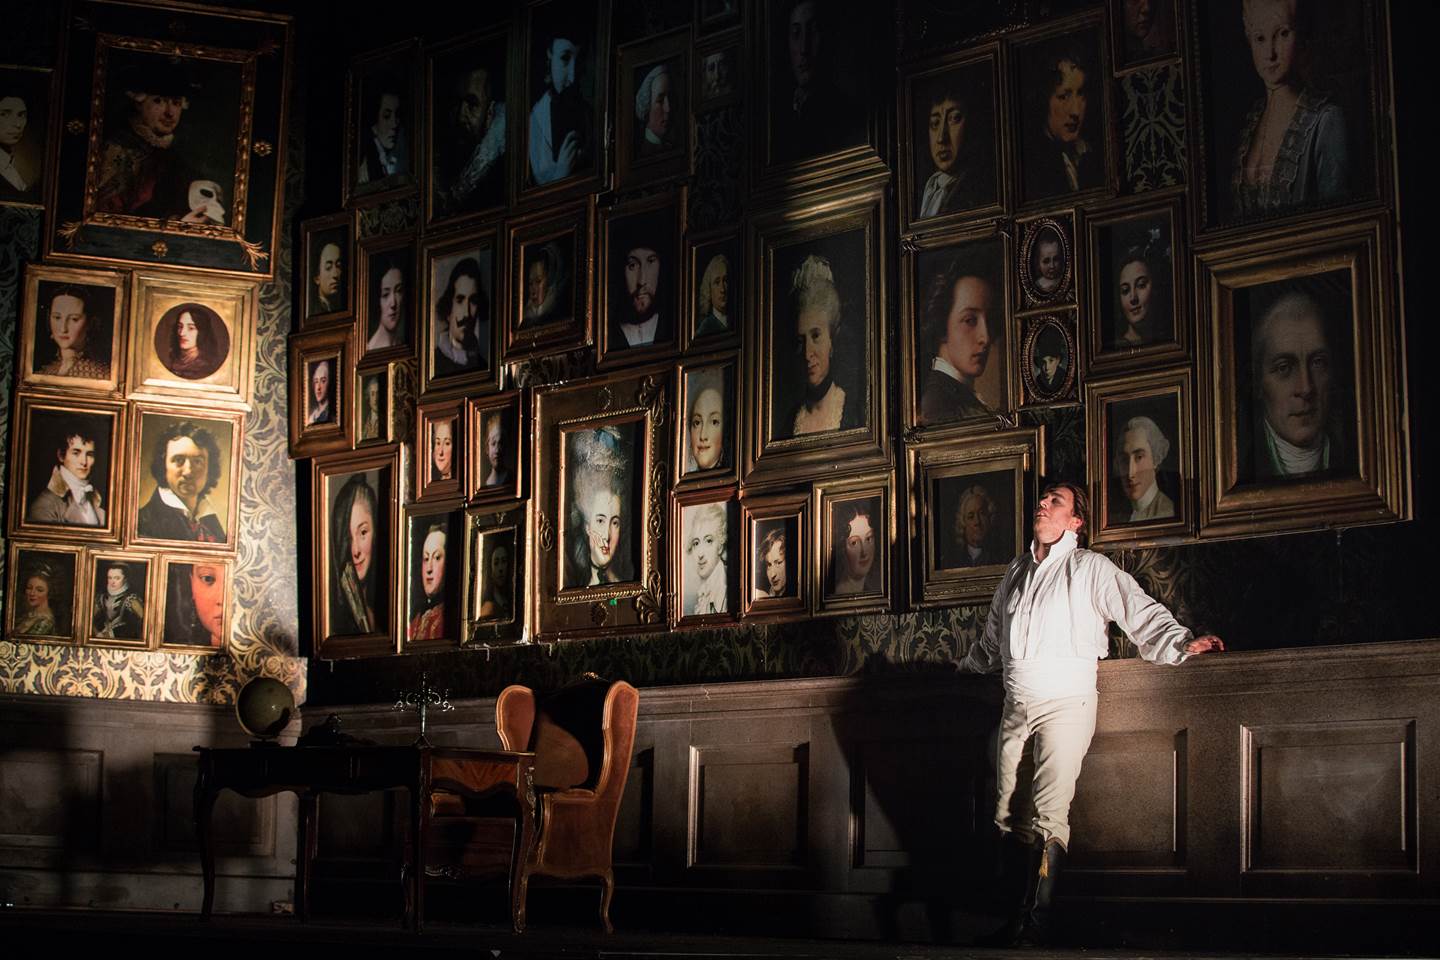 Un Ballo in Maschera male cast member standing against a large wall filled with framed portrait paintings.